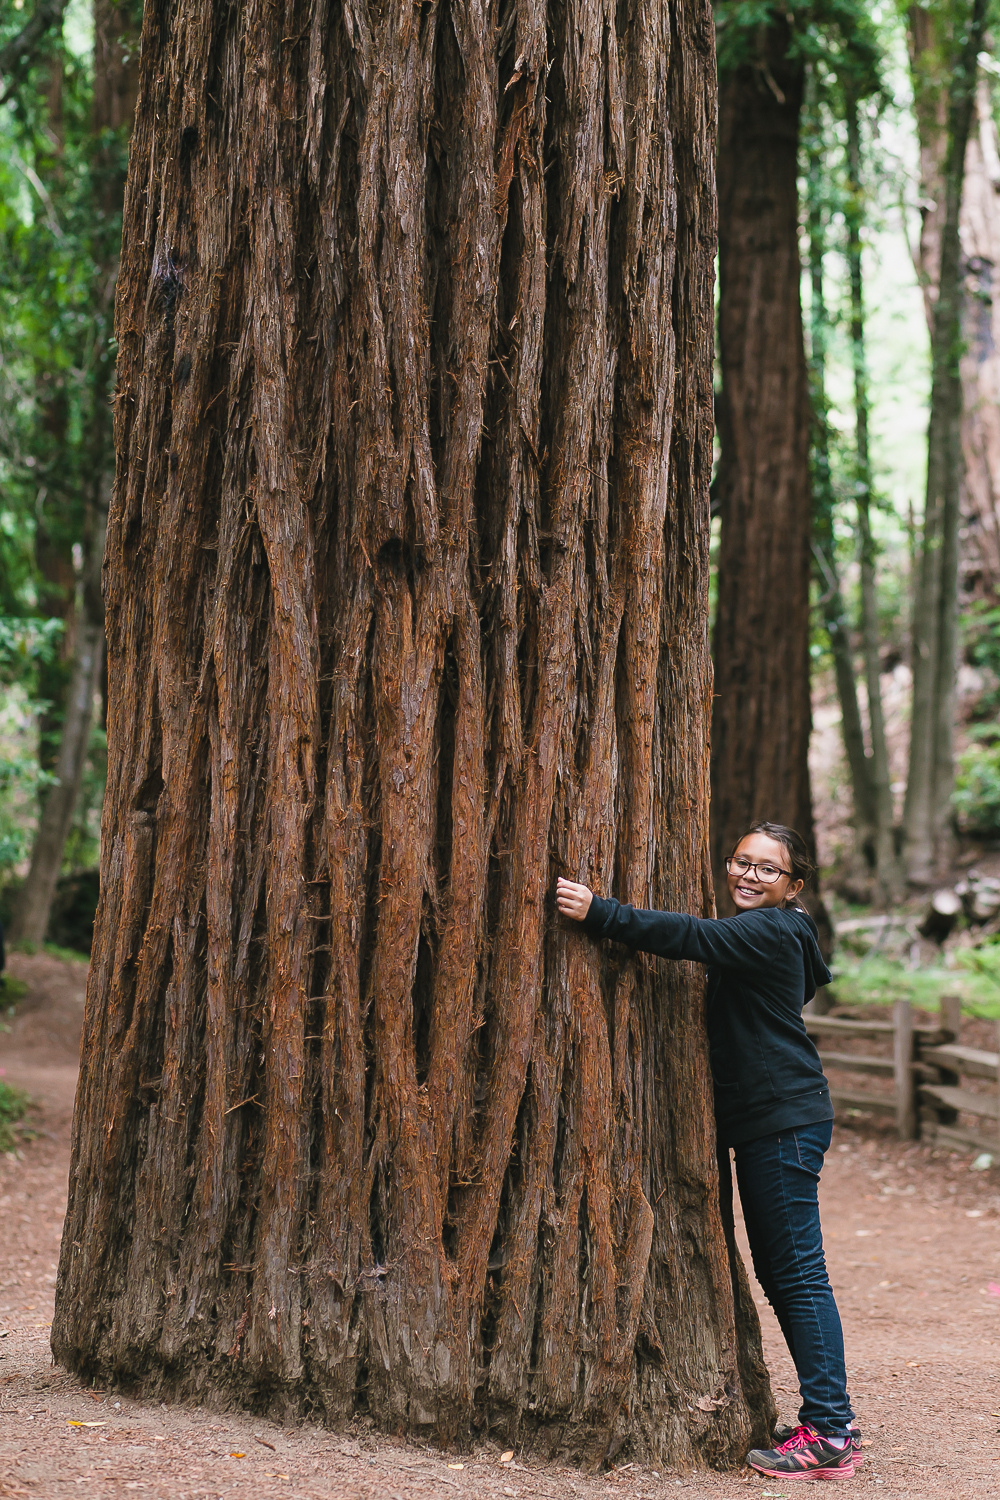 pfeiffer big sure state park, camping, redwoods, tent, chris holt photography, los angeles wedding photographer